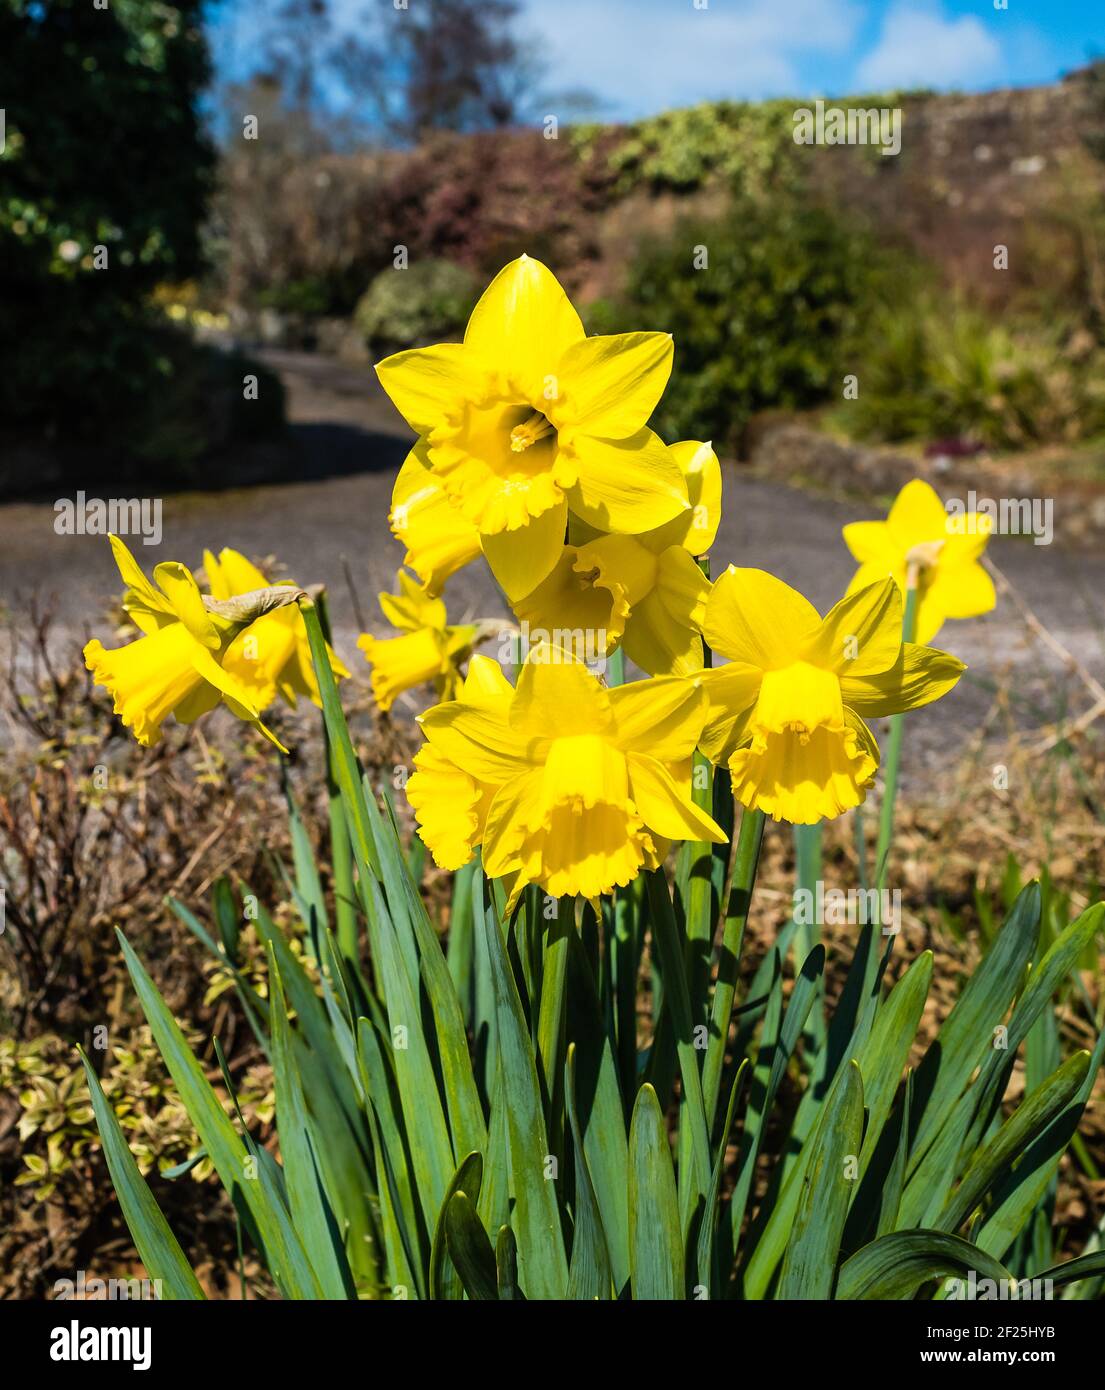 Daffodils Growing in a Country Garden. Stock Photo